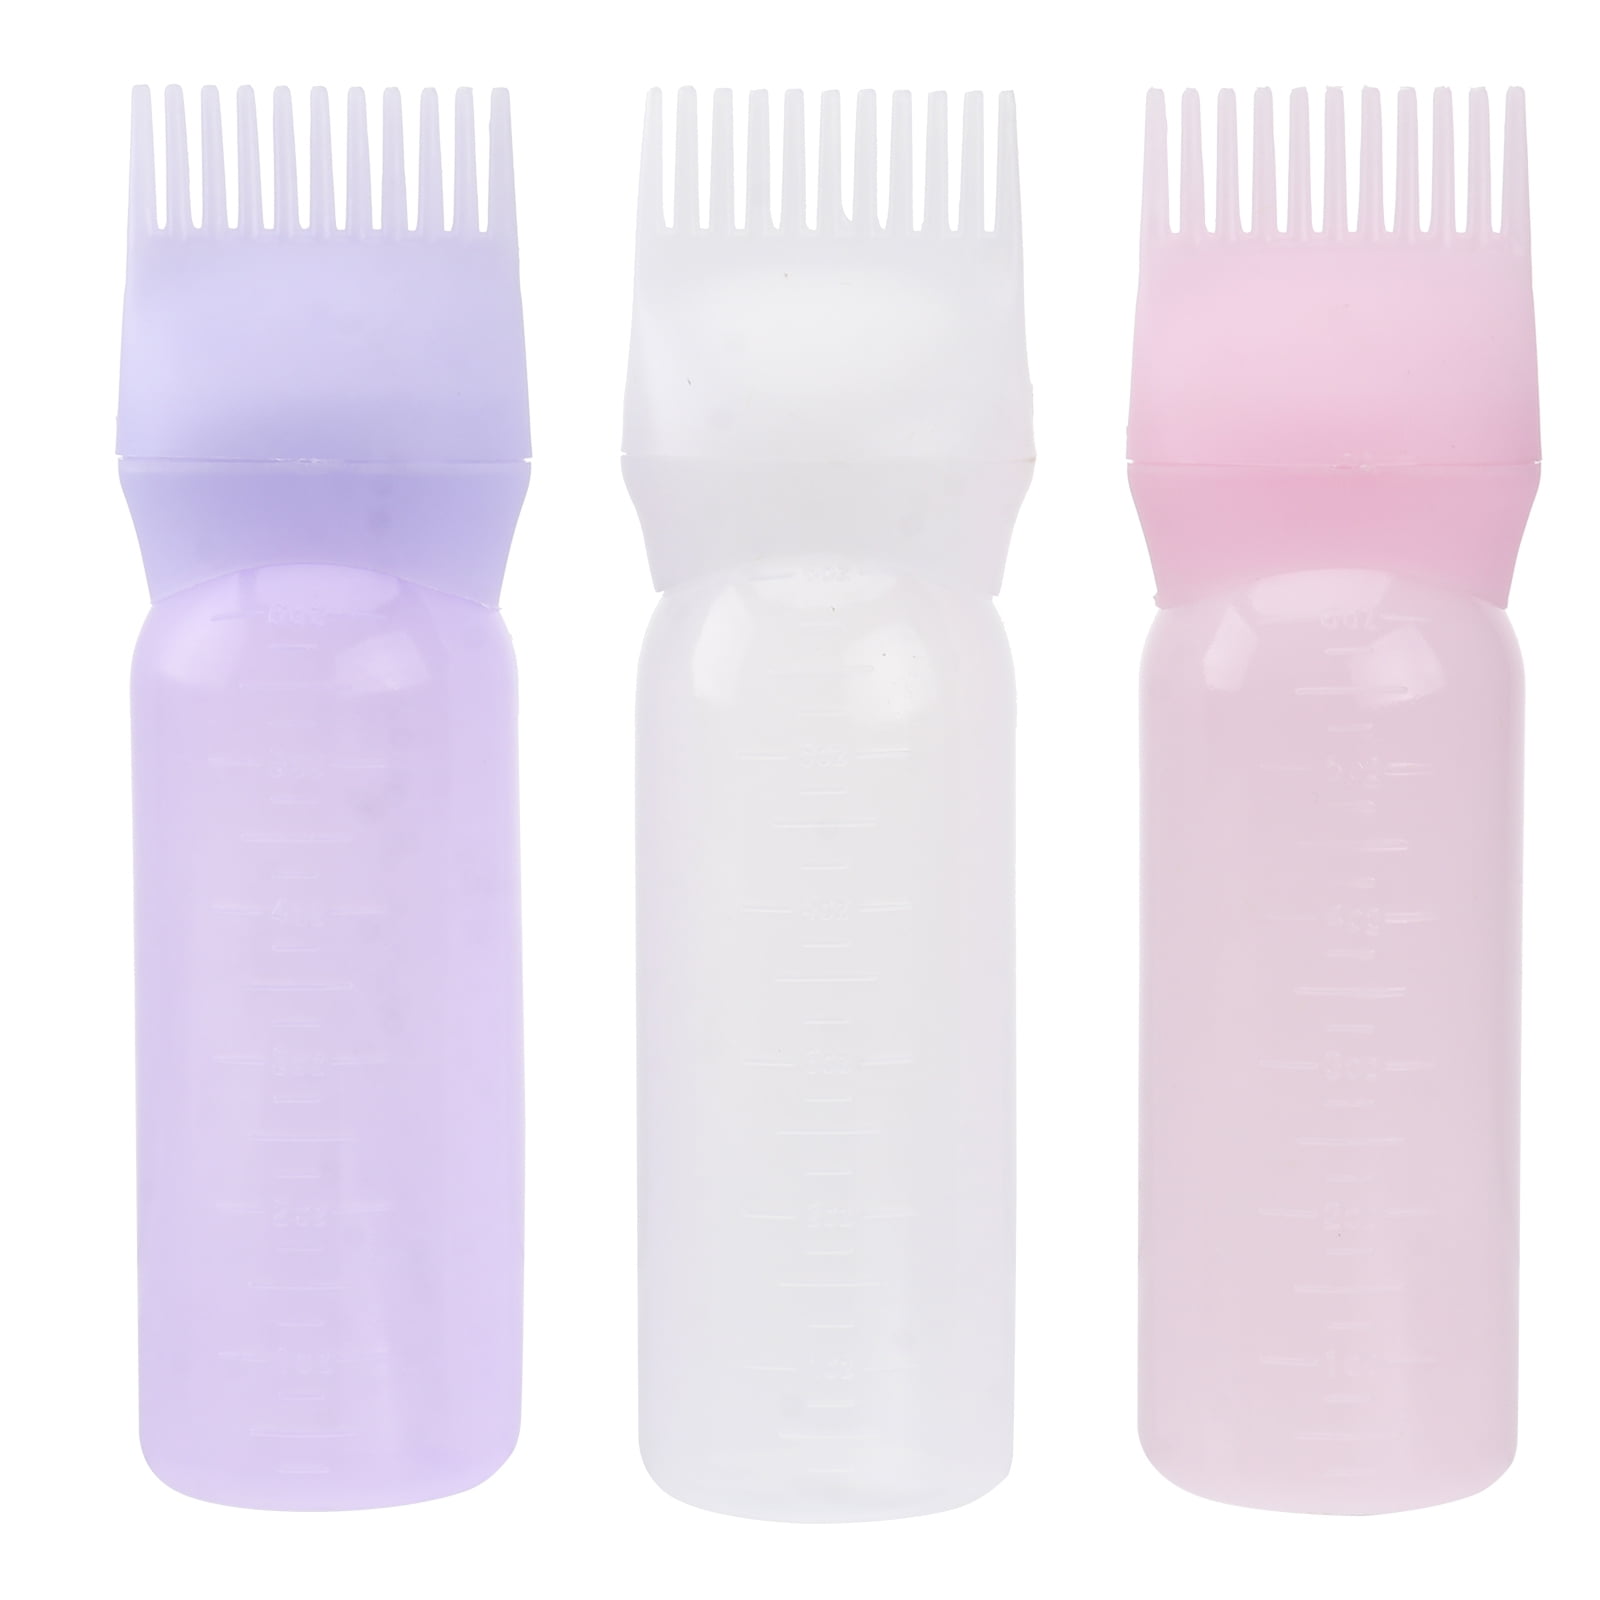 Hair Color Applicator Bottle, Natural with Straight Dispensing Tip